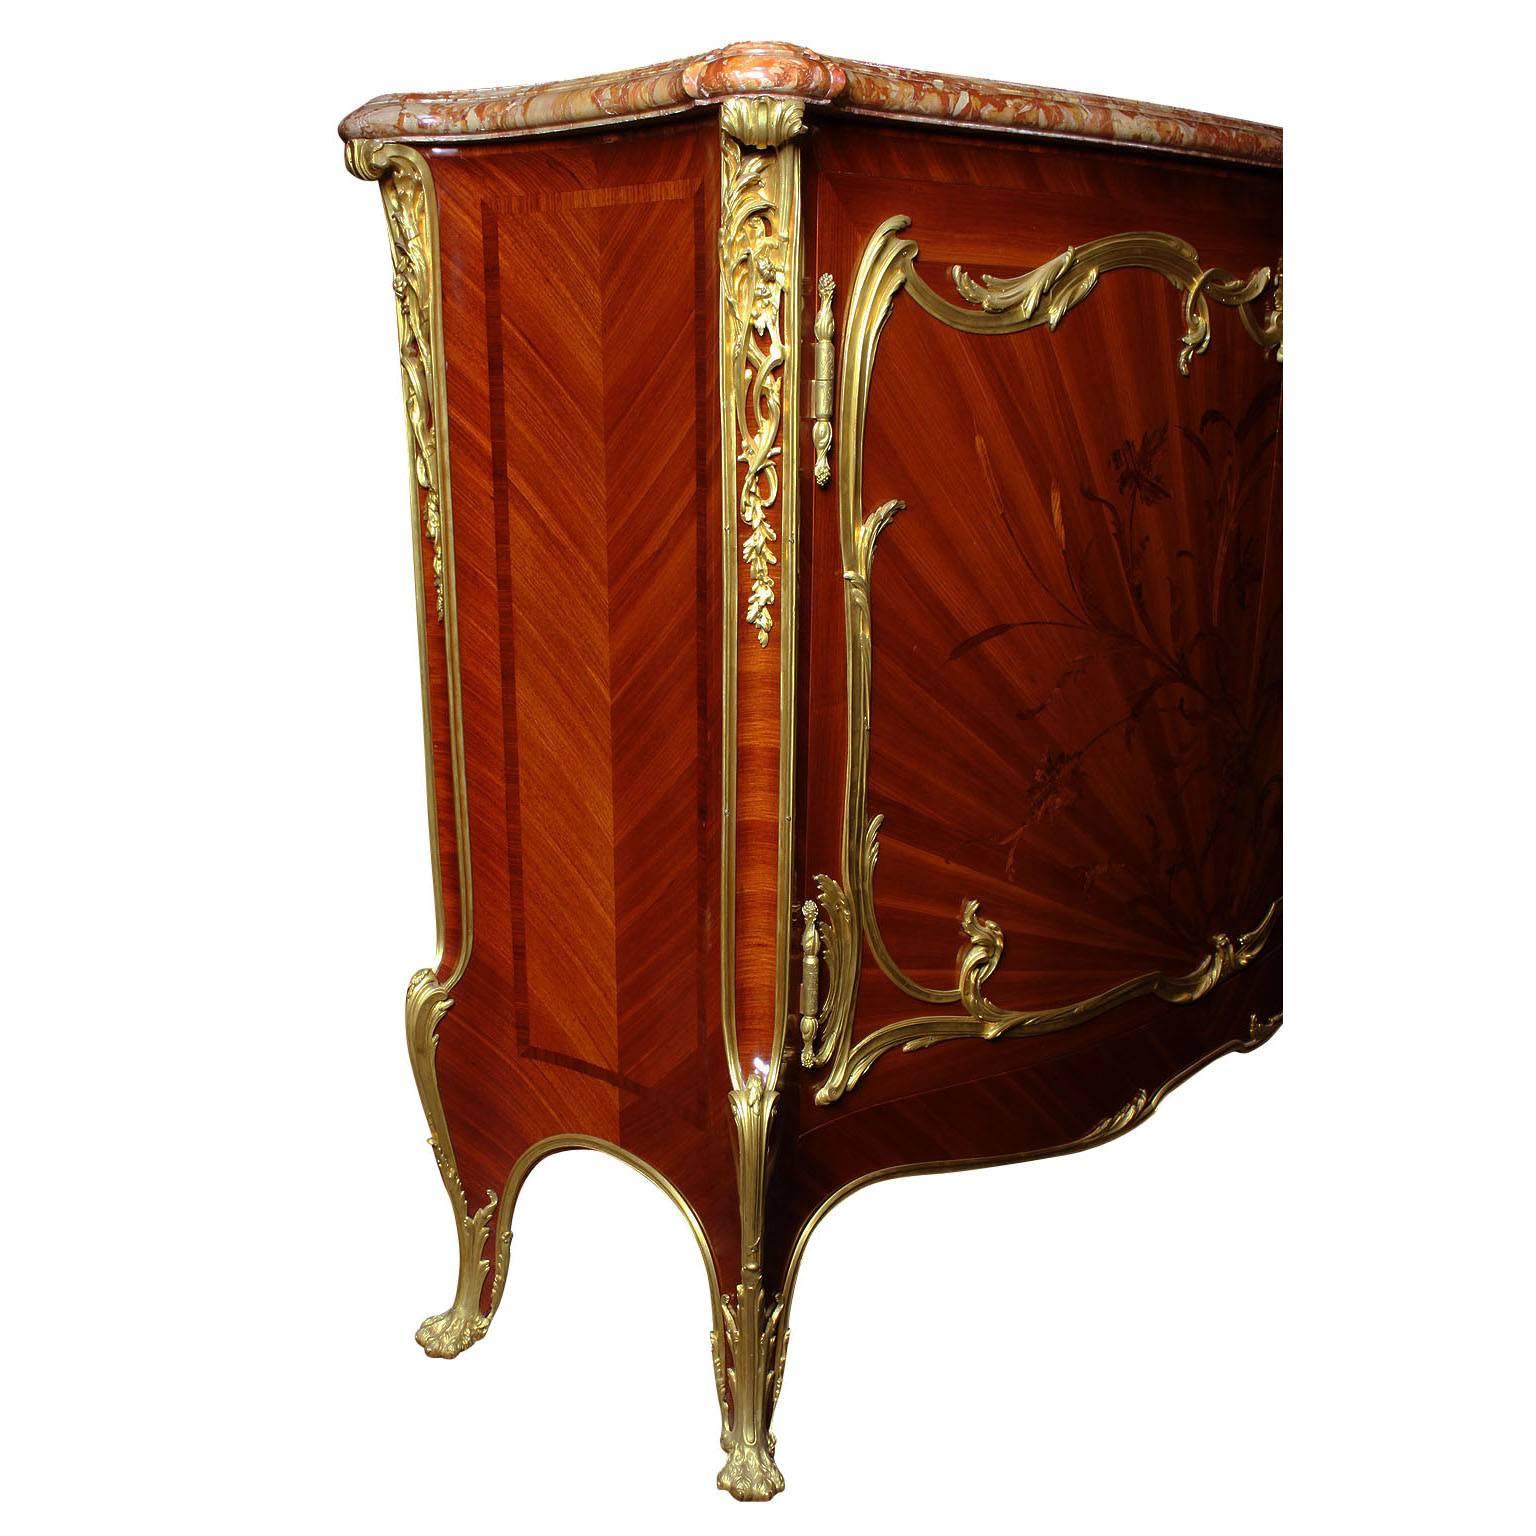 European French 19th Century Louis XV Style Ormolu Mounted Marquetry Meuble D'appui For Sale